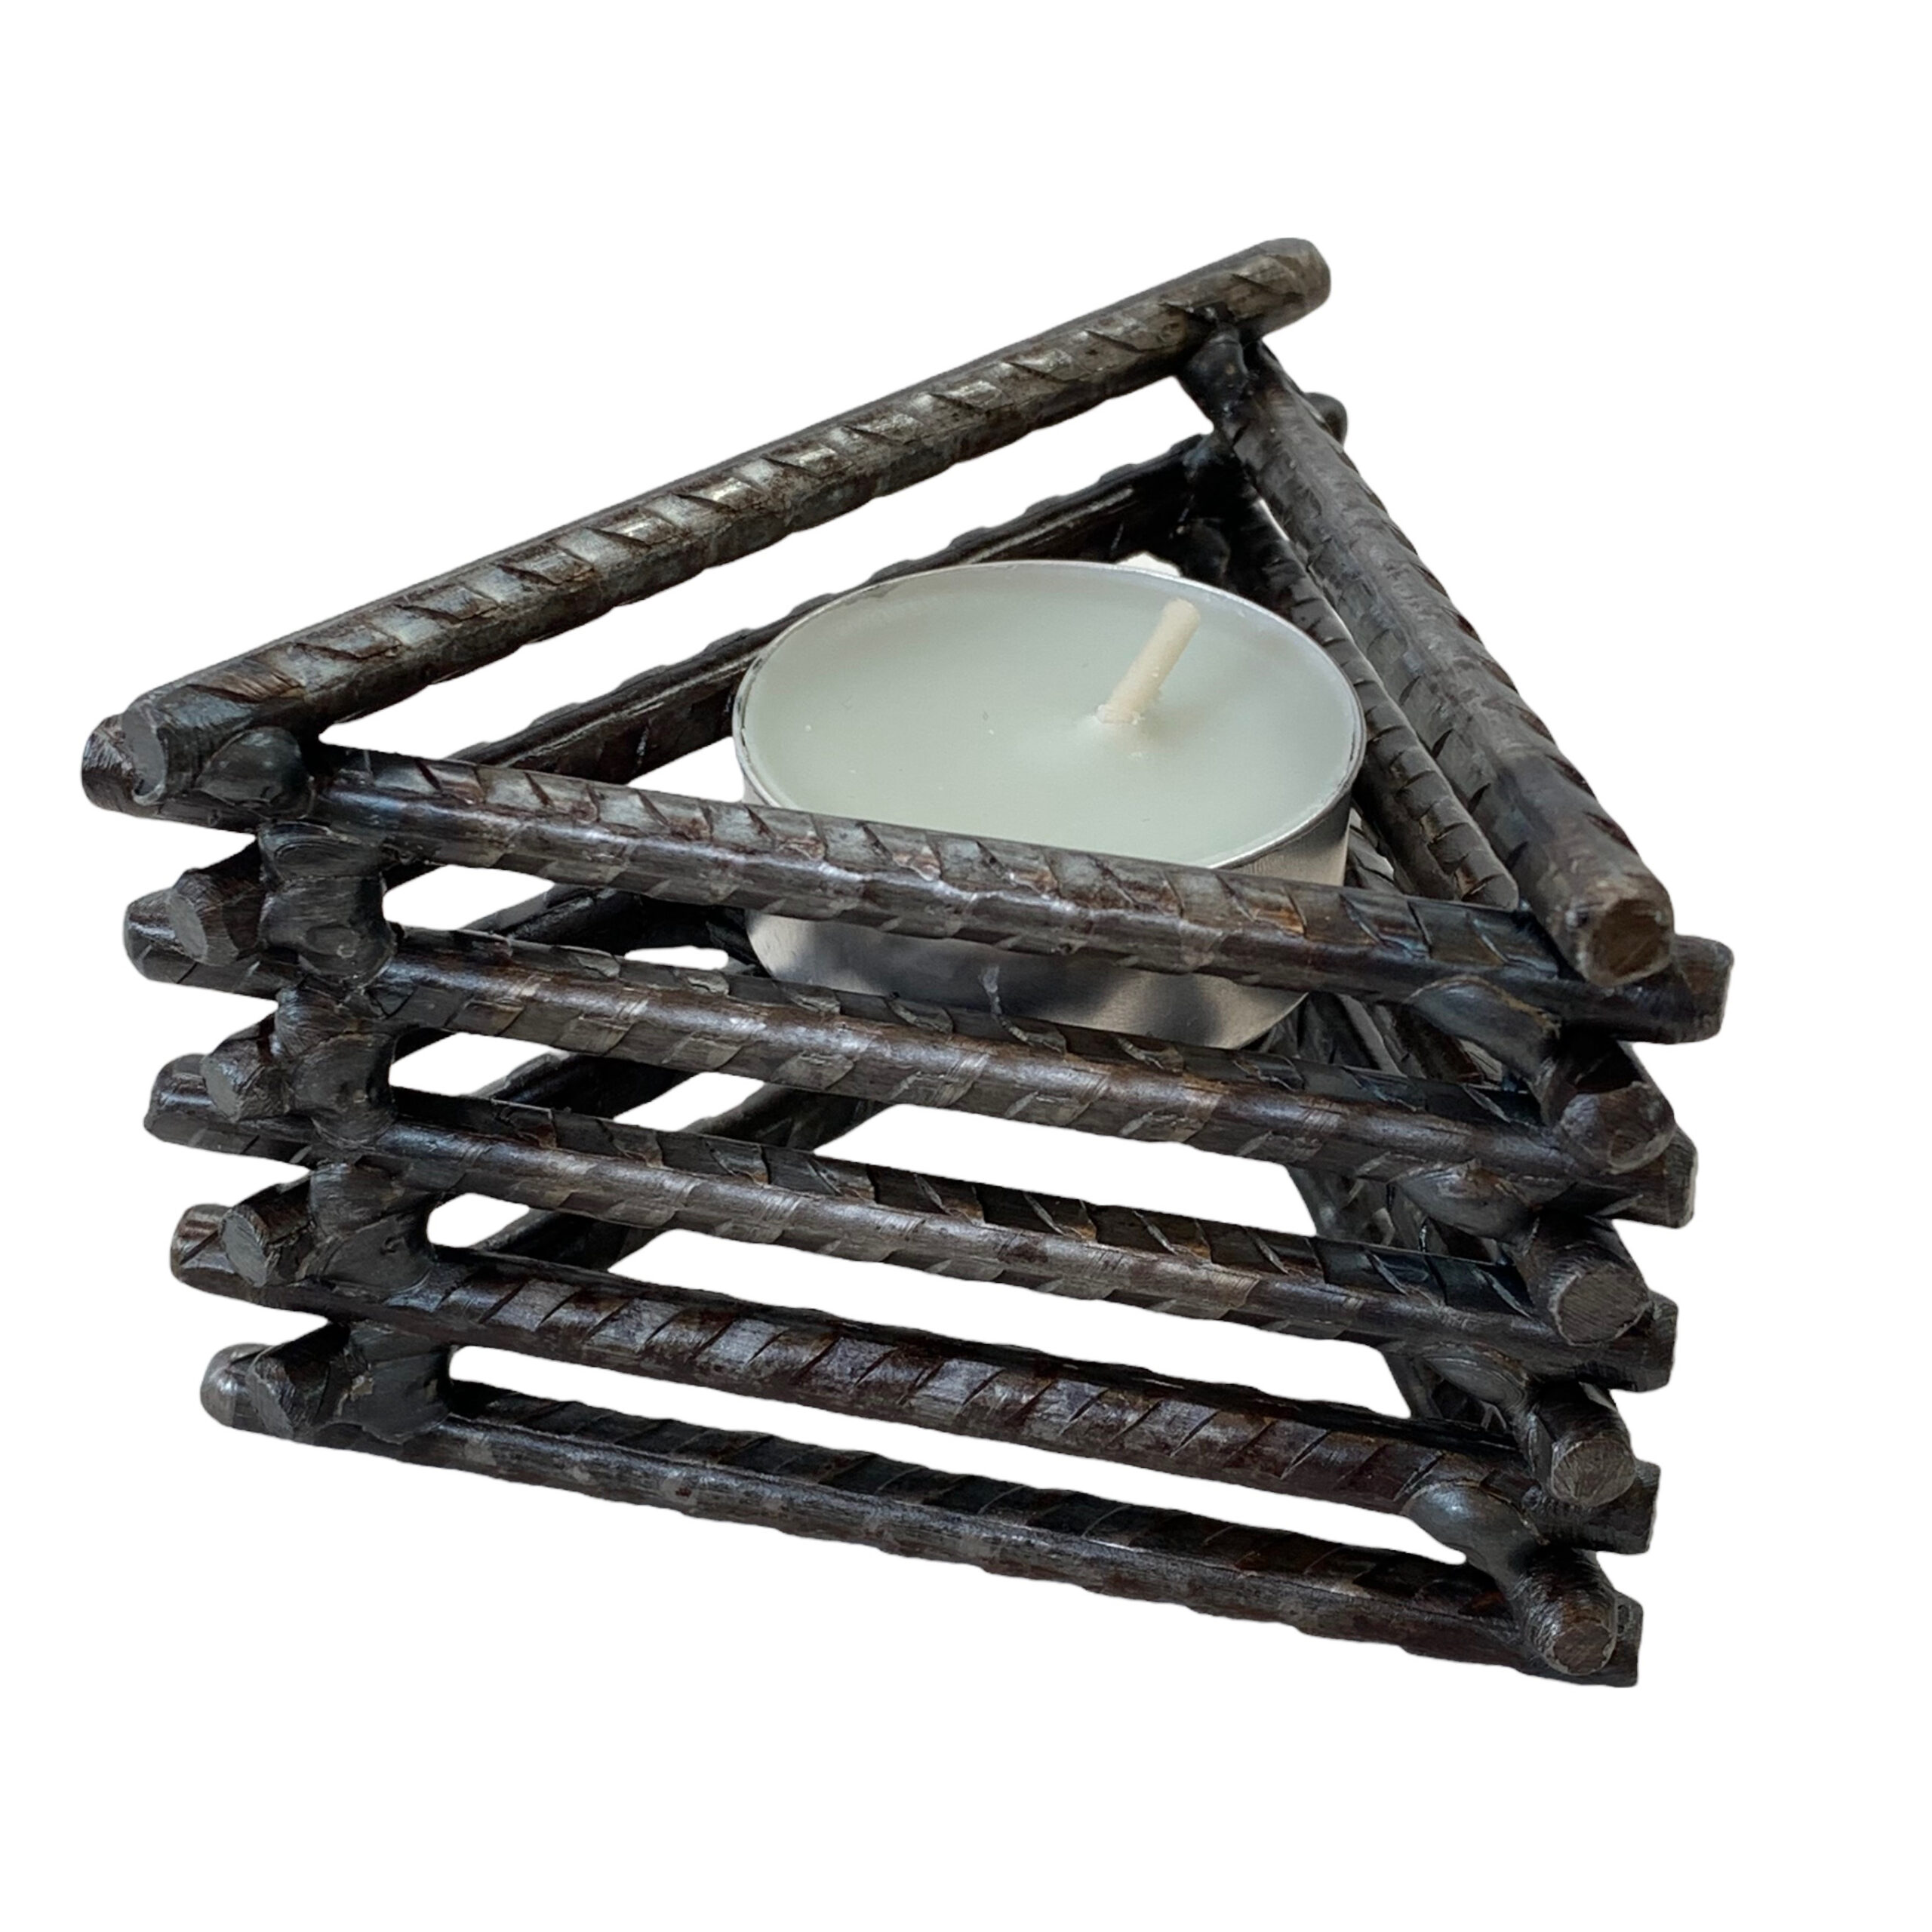 Mountain Tea Light Holder by Wendy Stone made of reclaimed steel | Effusion Art Gallery + Cast Glass Studio, Invermere BC